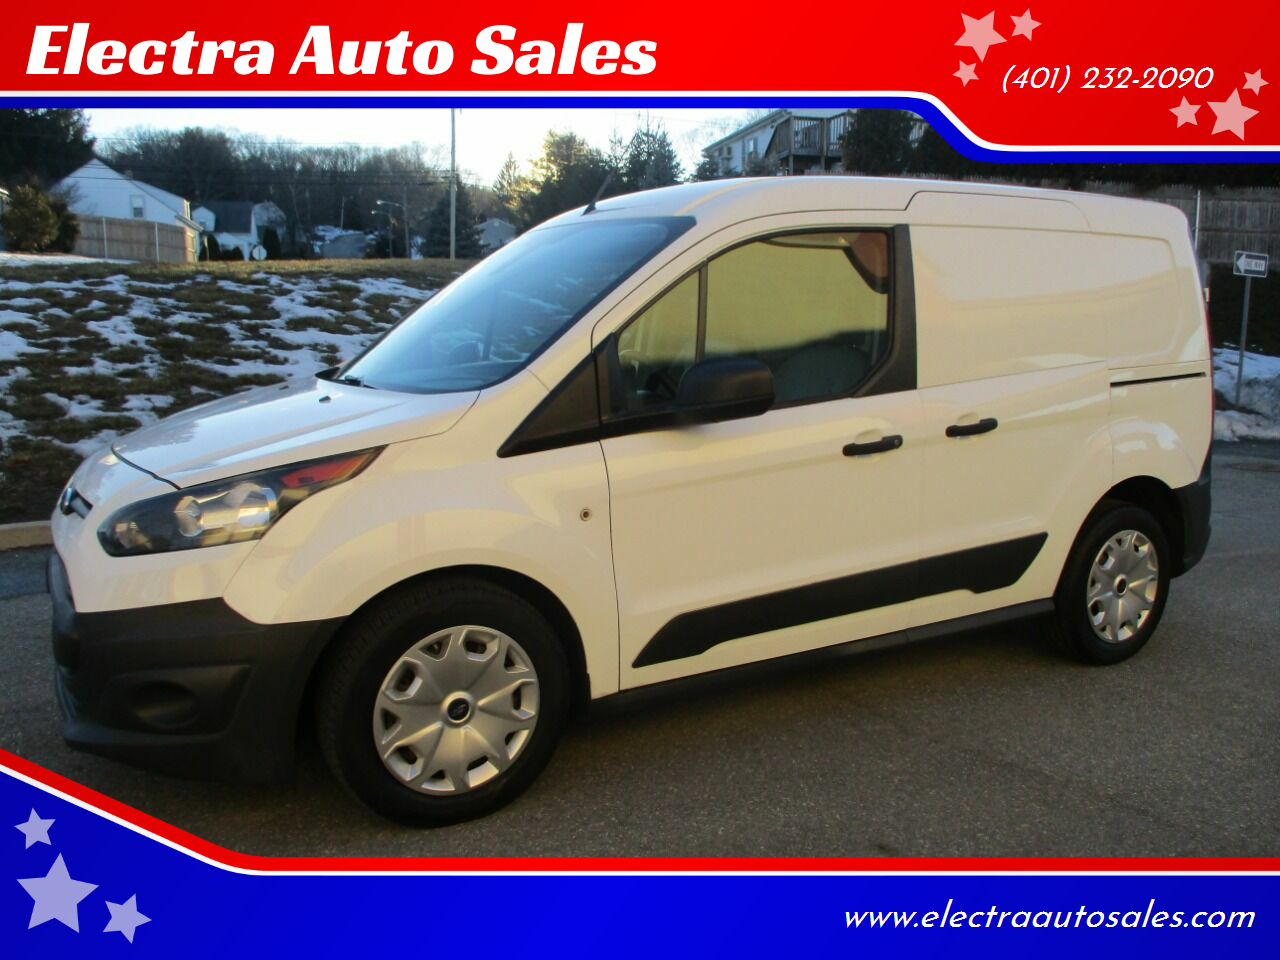 Used Cargo Vans For Sale In Swansea, MA 